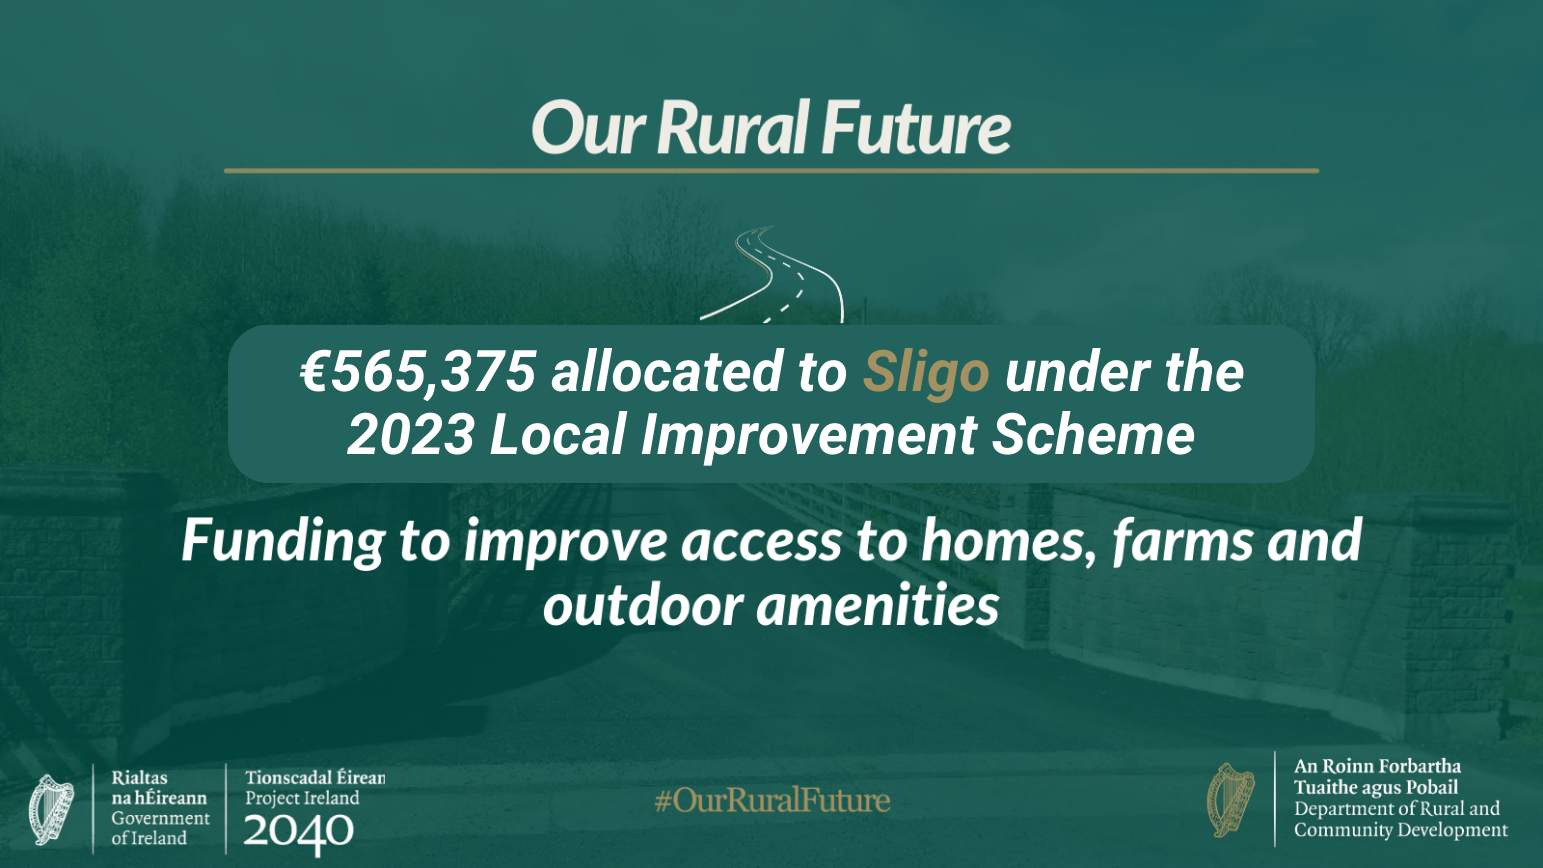 Our Rural Future: Minister Humphreys announces further €16 million in funding for upgrade works on rural roads and laneways